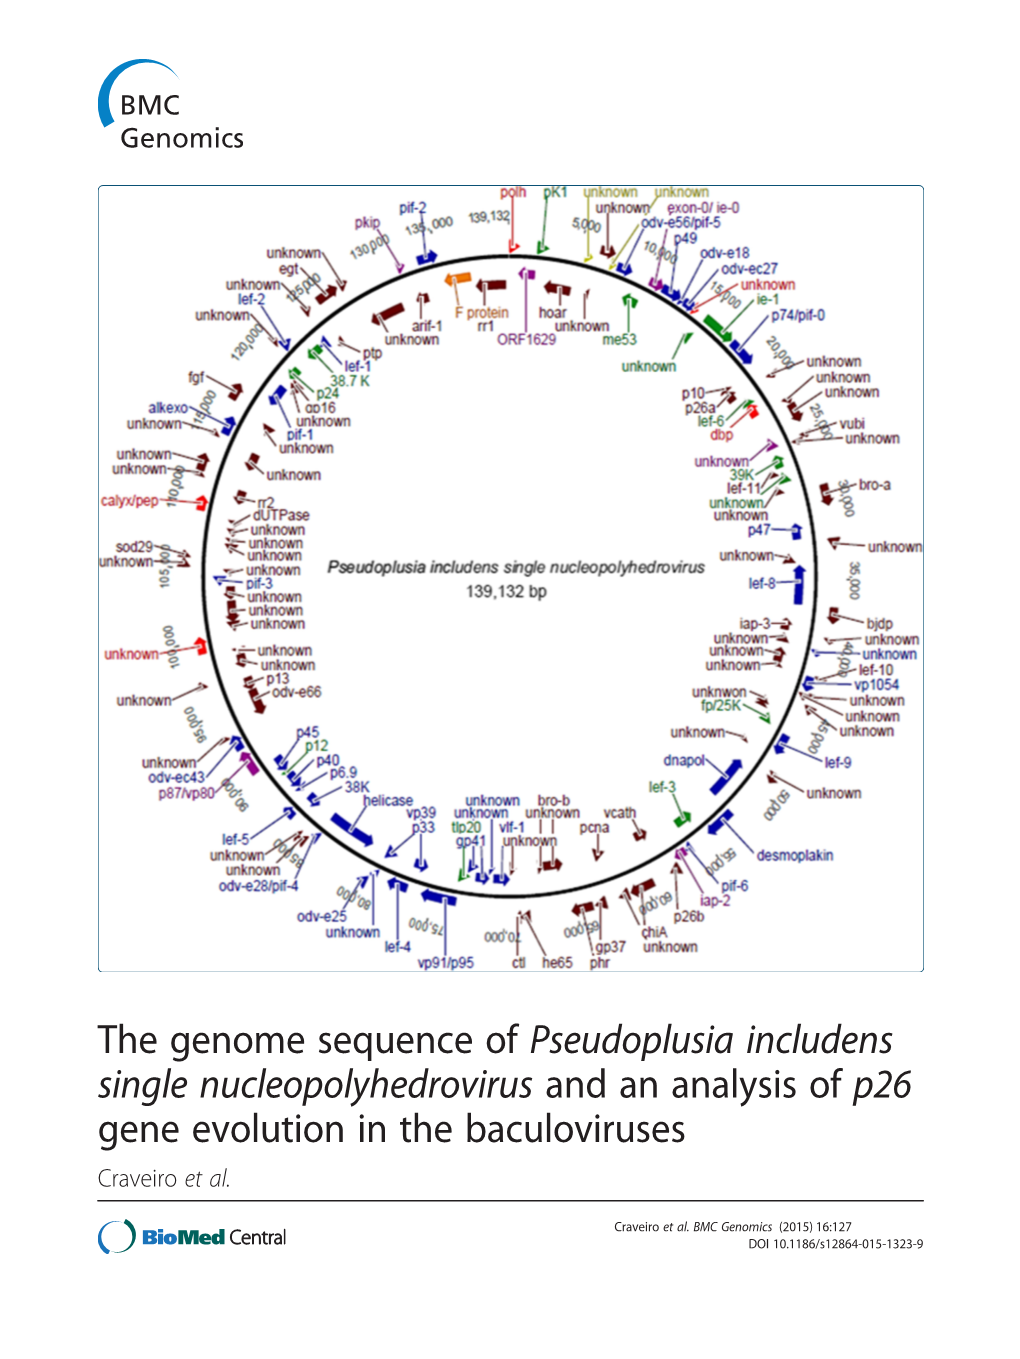 The Genome Sequence of Pseudoplusia Includens Single Nucleopolyhedrovirus and an Analysis of P26 Gene Evolution in the Baculoviruses Craveiro Et Al